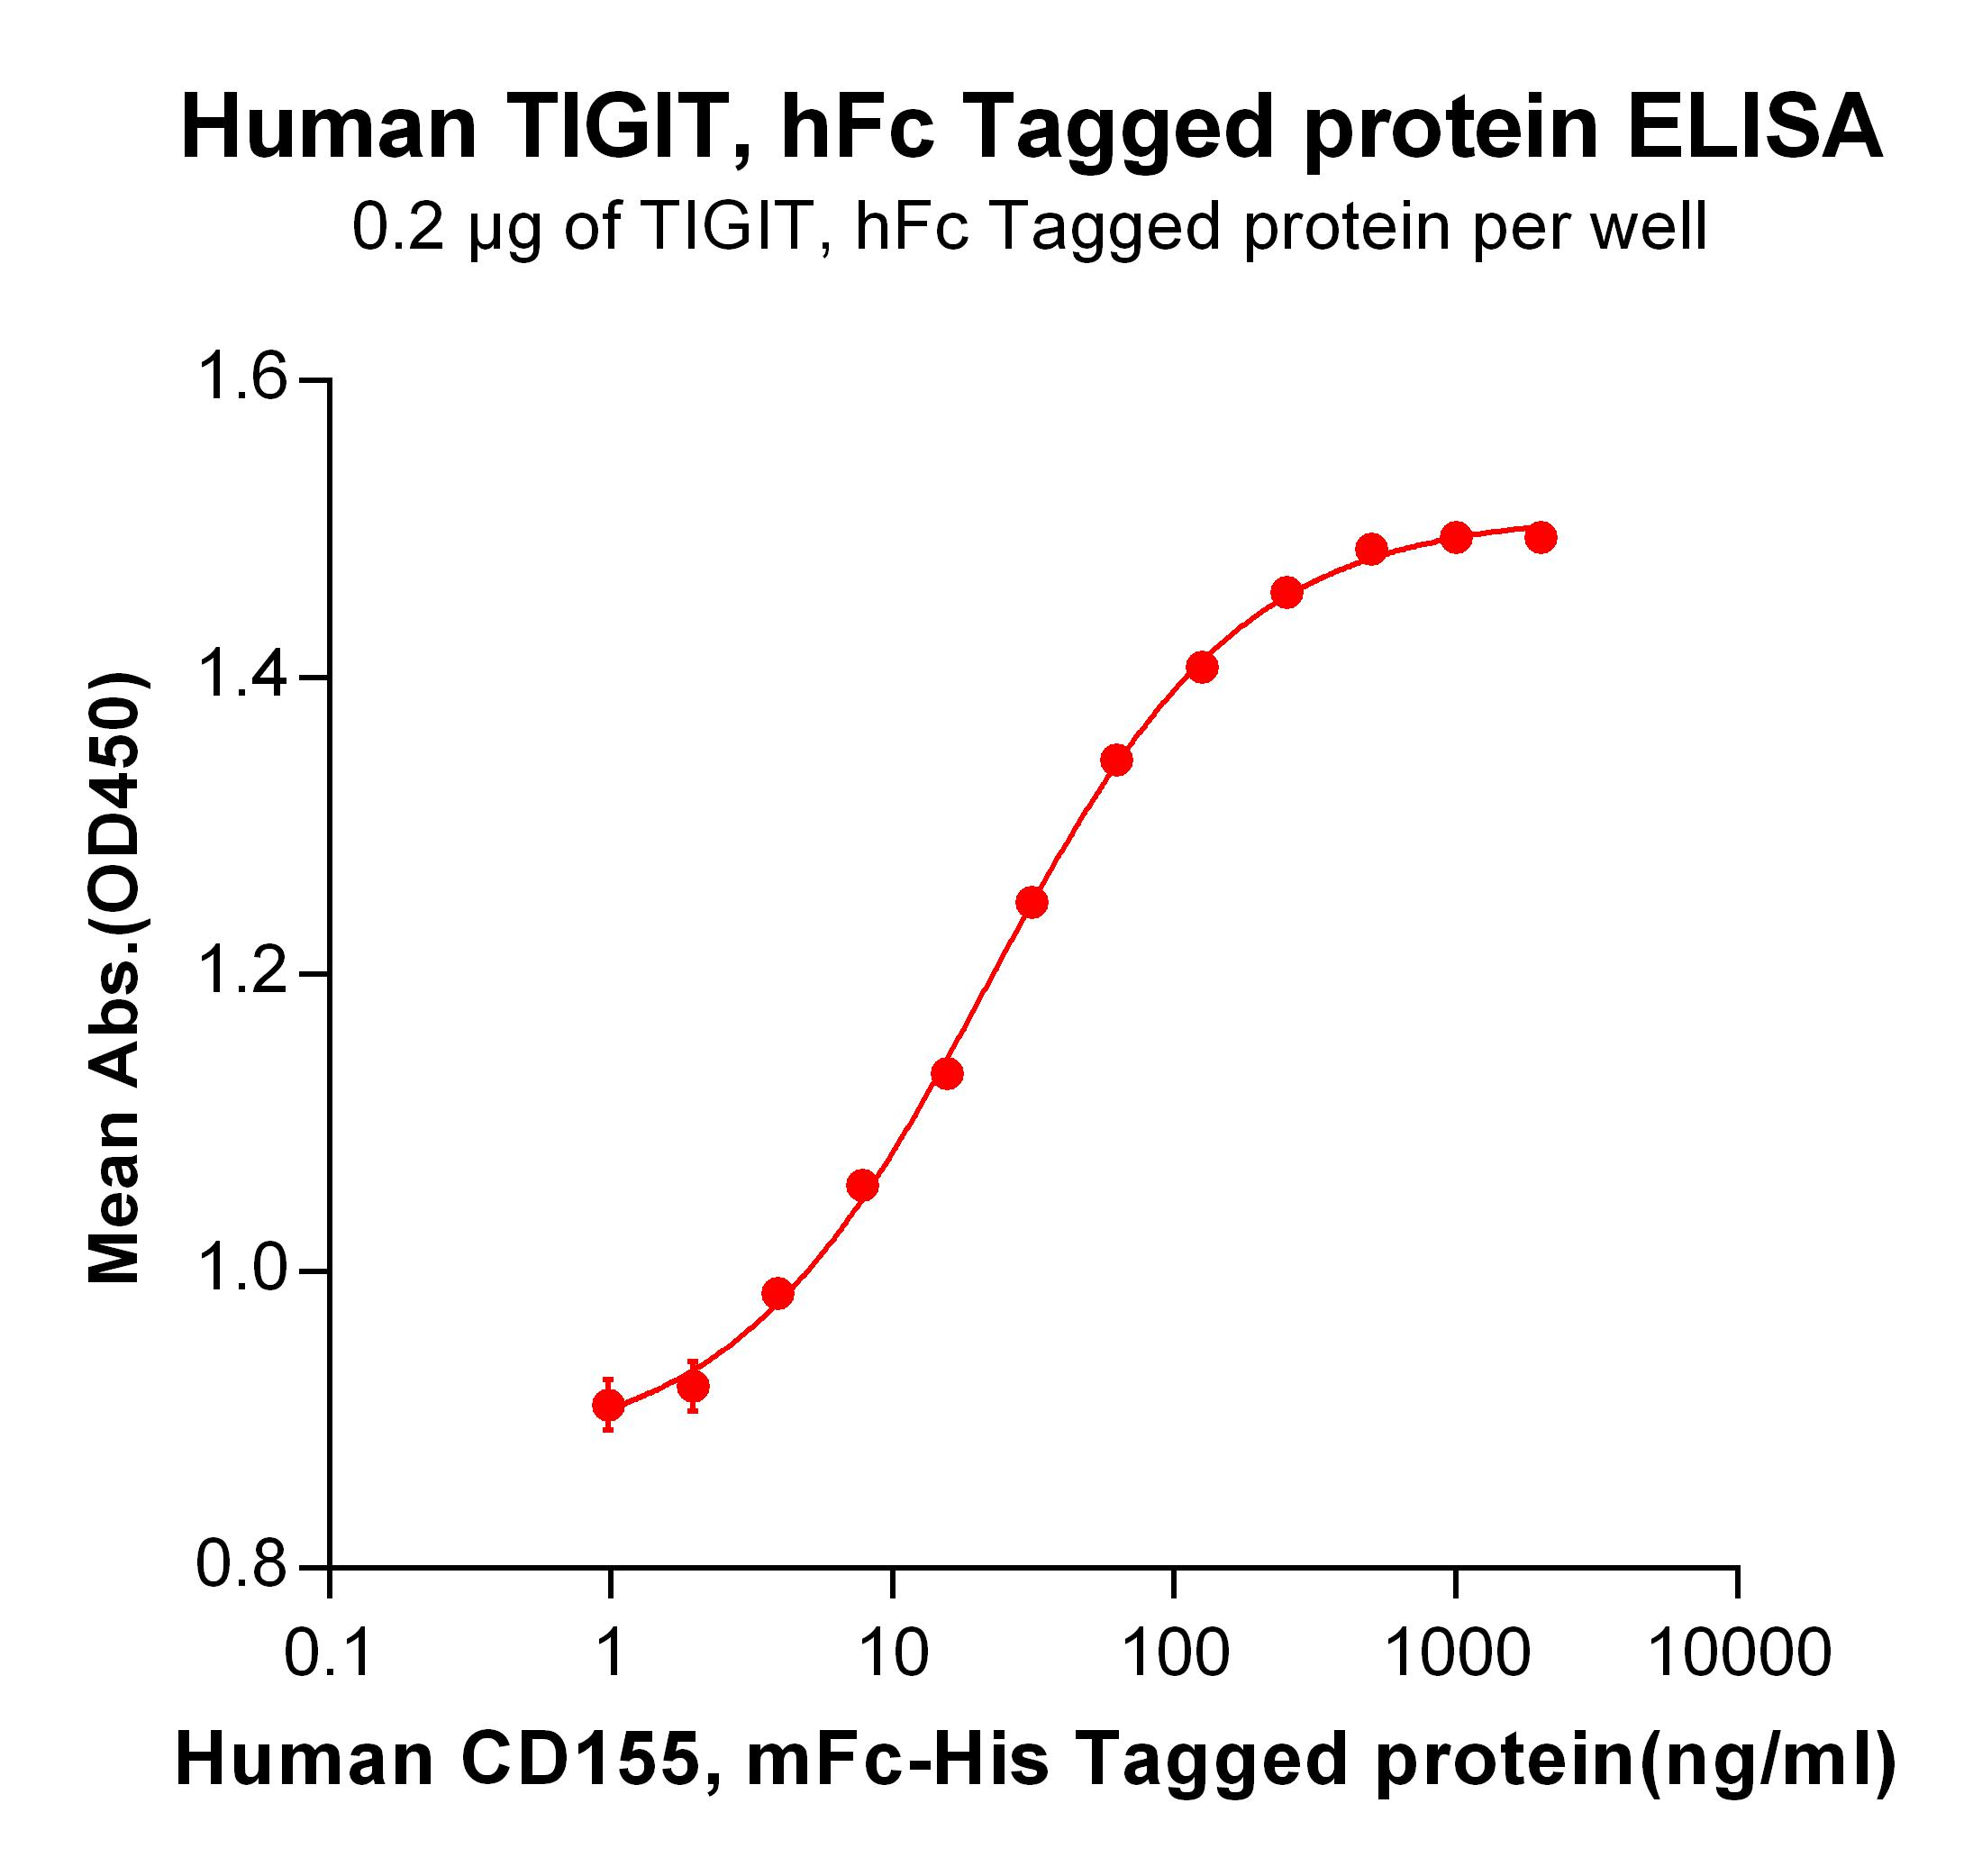 Figure 2. ELISA plate pre-coated by 2 µg/ml (100 µl/well) Human CD155, mFc-His tagged protein  can bind Human TIGIT, hFc tagged protein  in a linear range of 1.95-125 ng/ml.